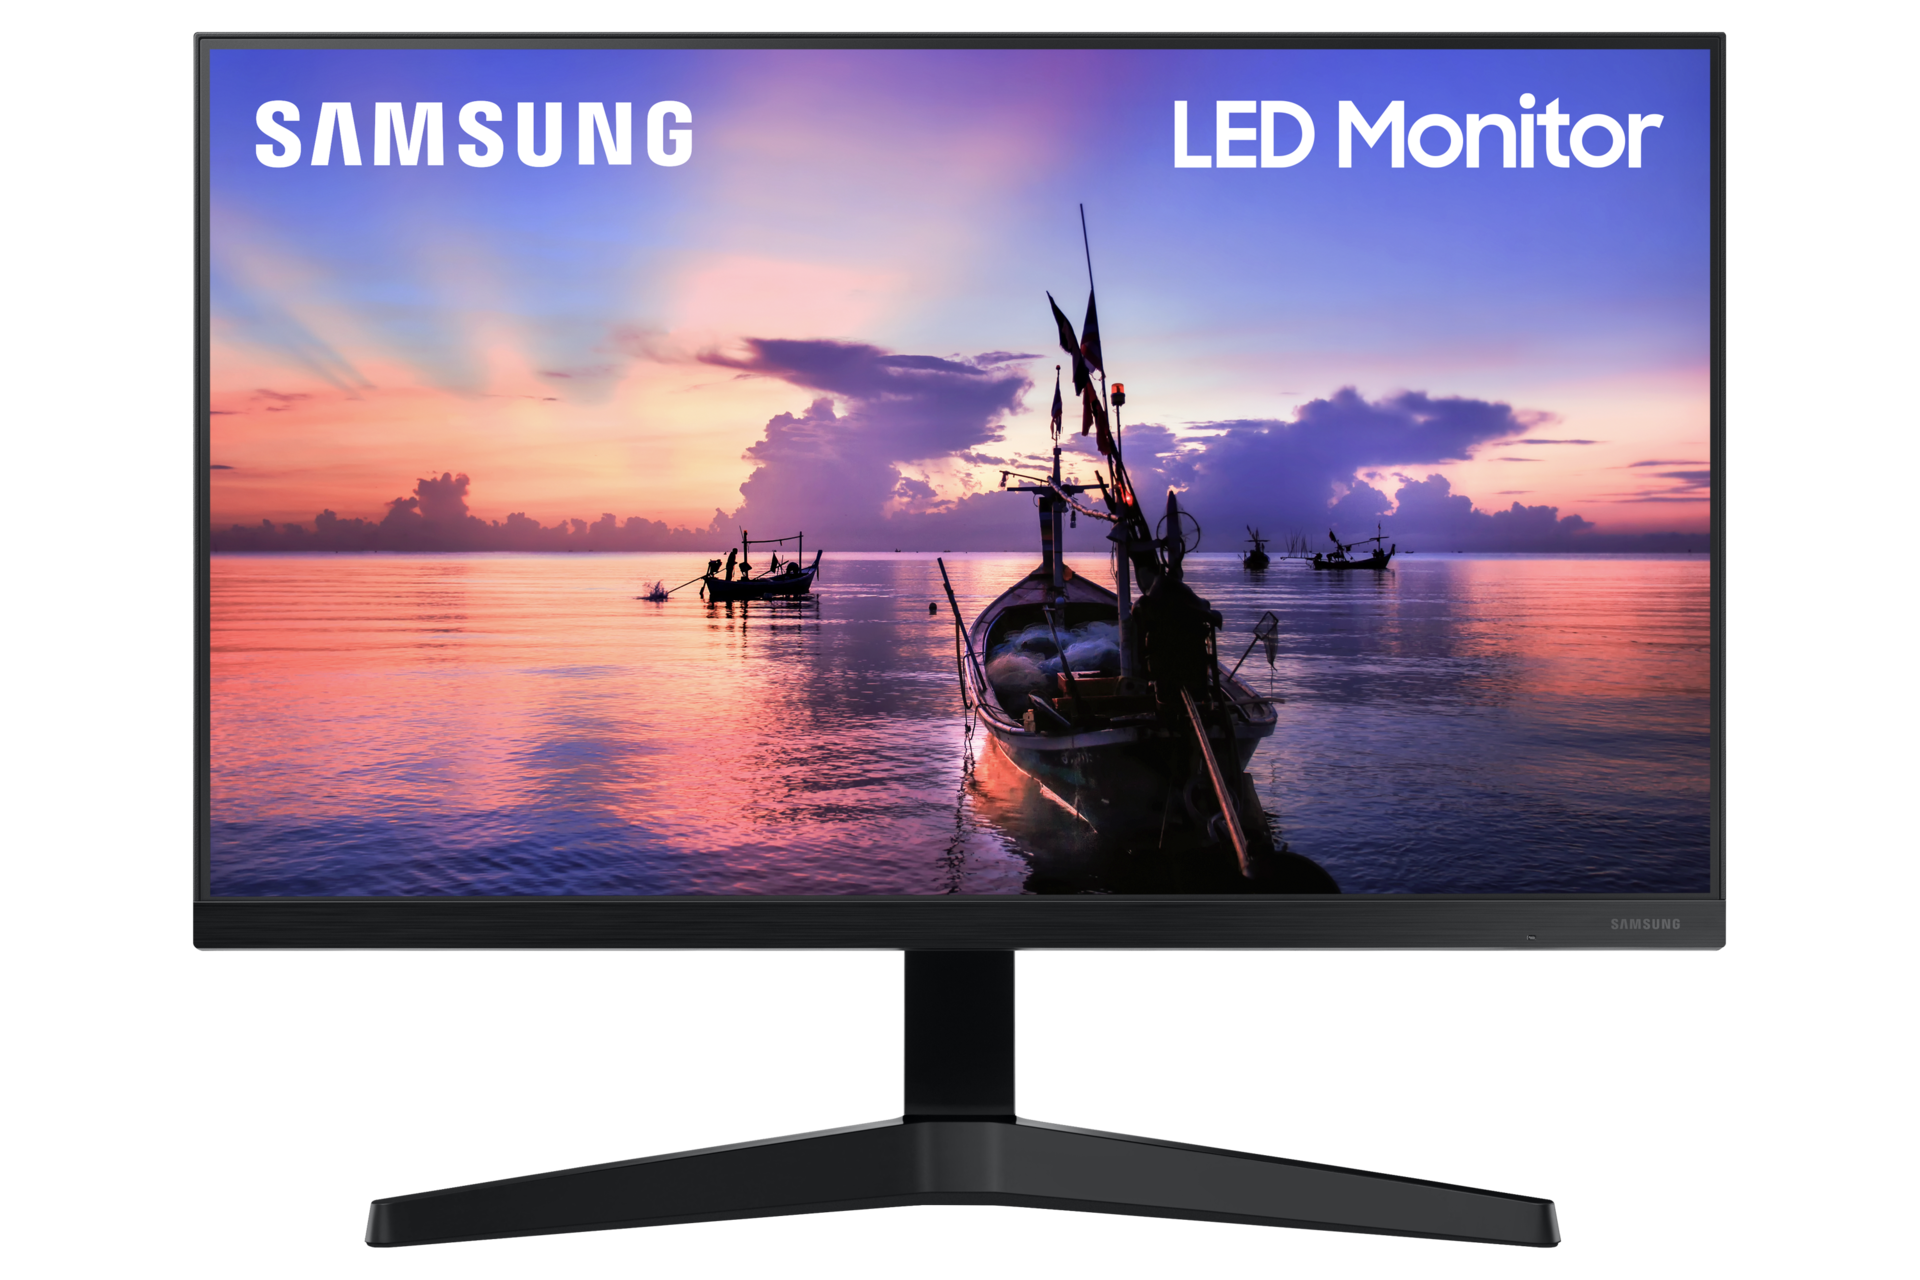 24" LED Monitor with IPS panel and Borderless Design